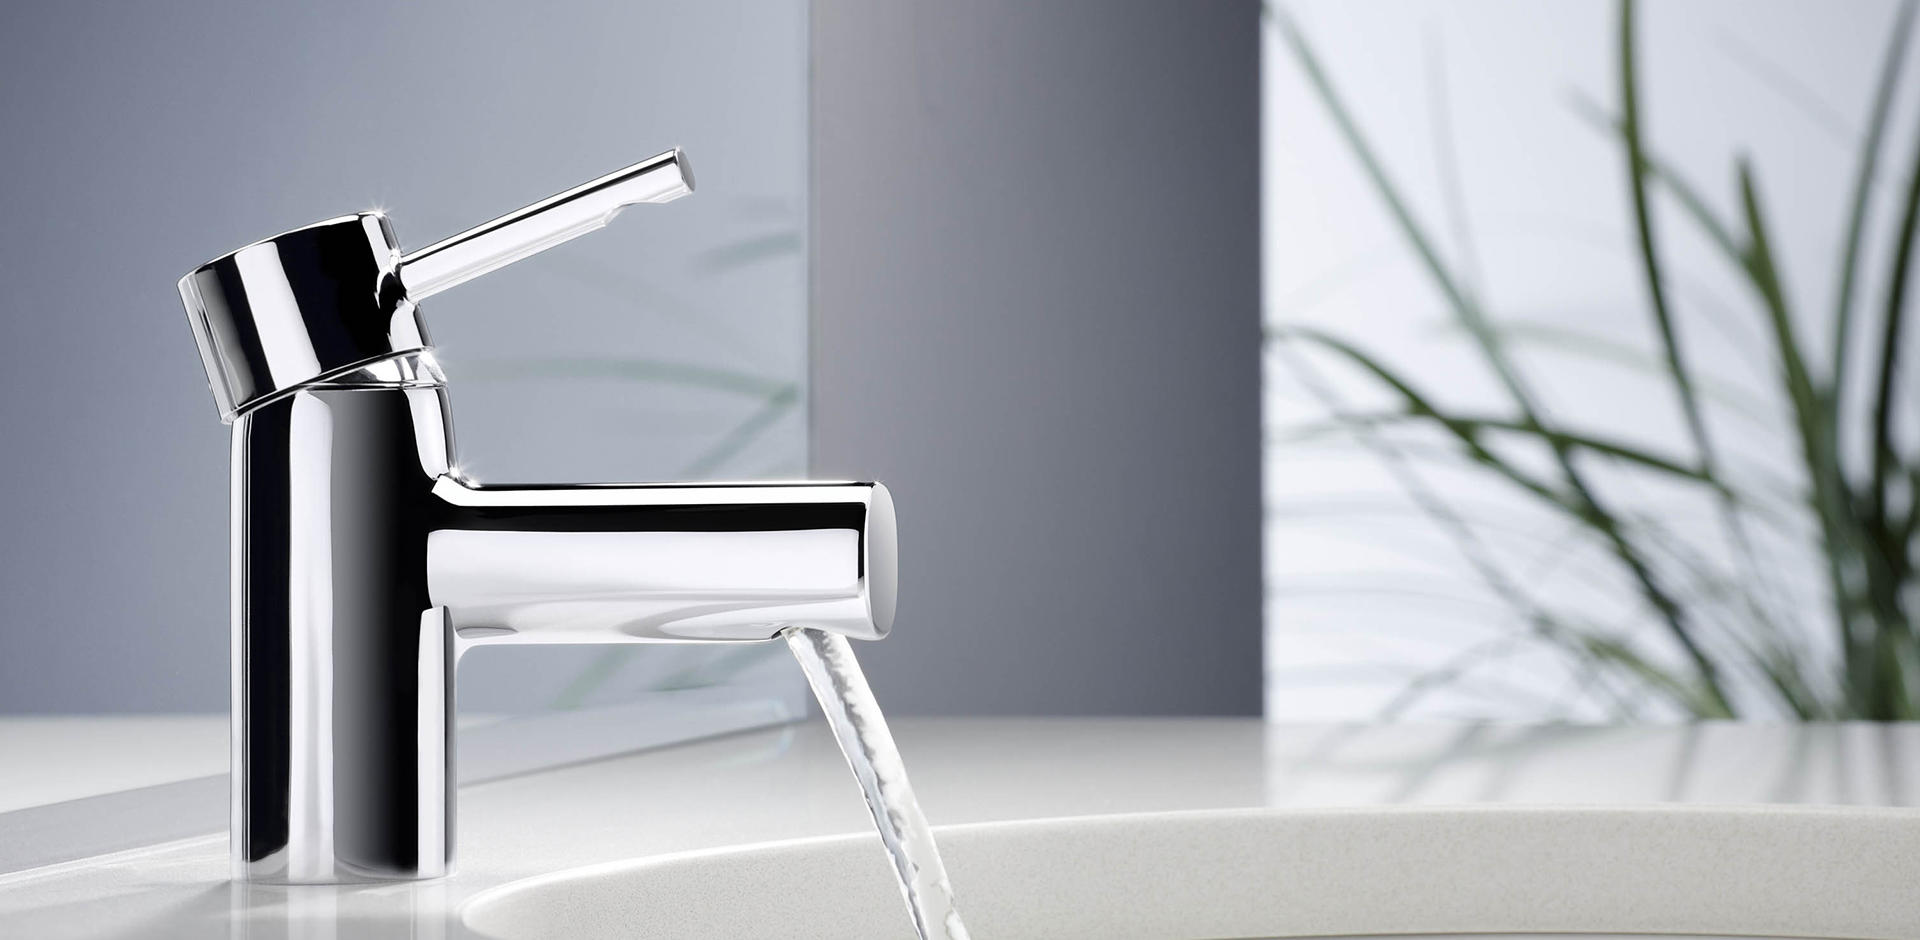 The Working Principle Of Thermostatic Faucet And Hot And Cold Water Faucet